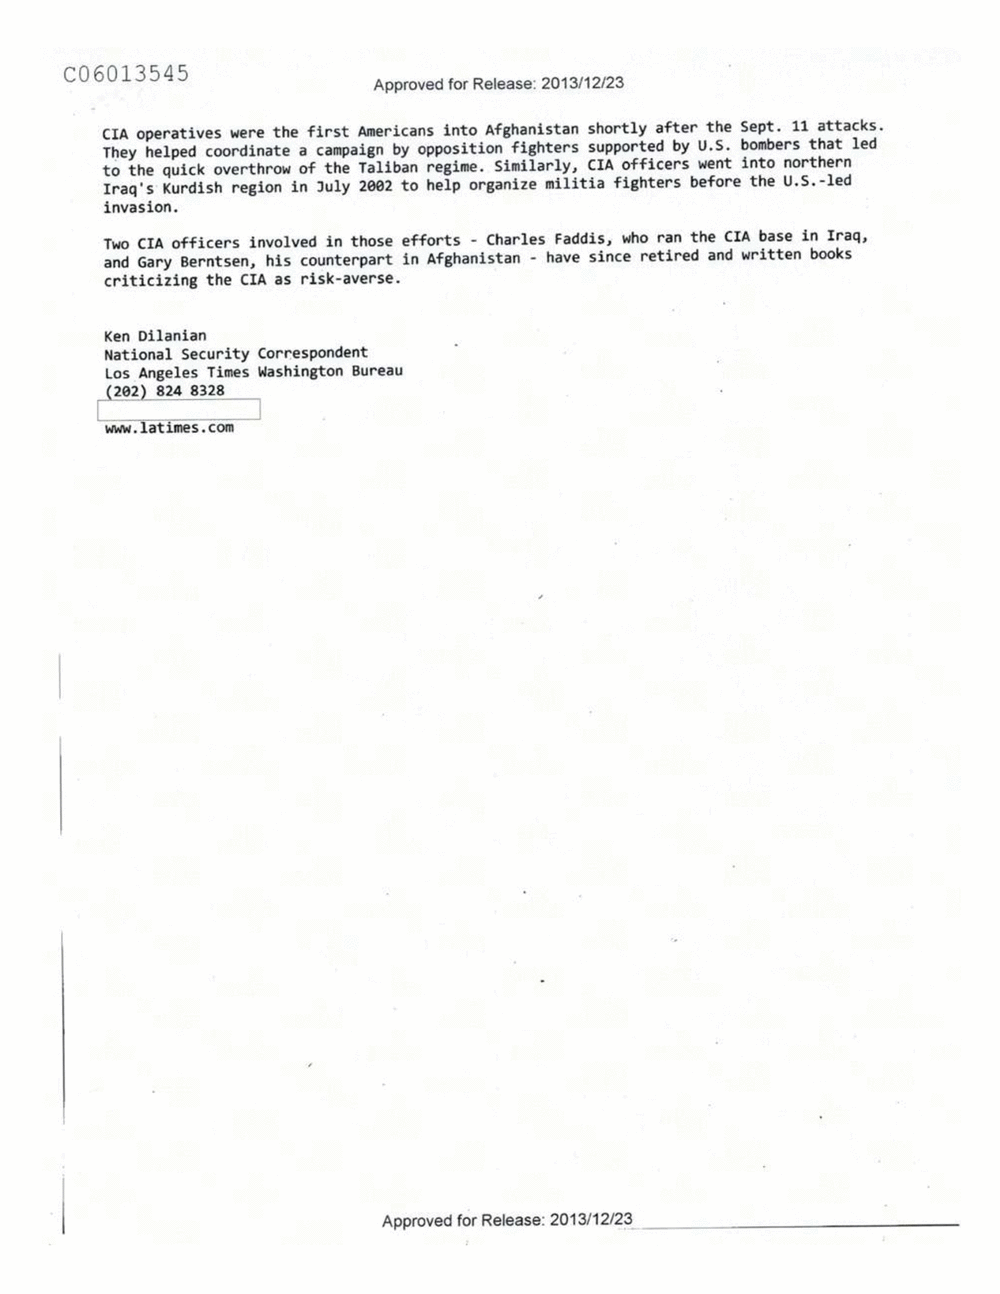 Page 407 from Email Correspondence Between Reporters and CIA Flacks